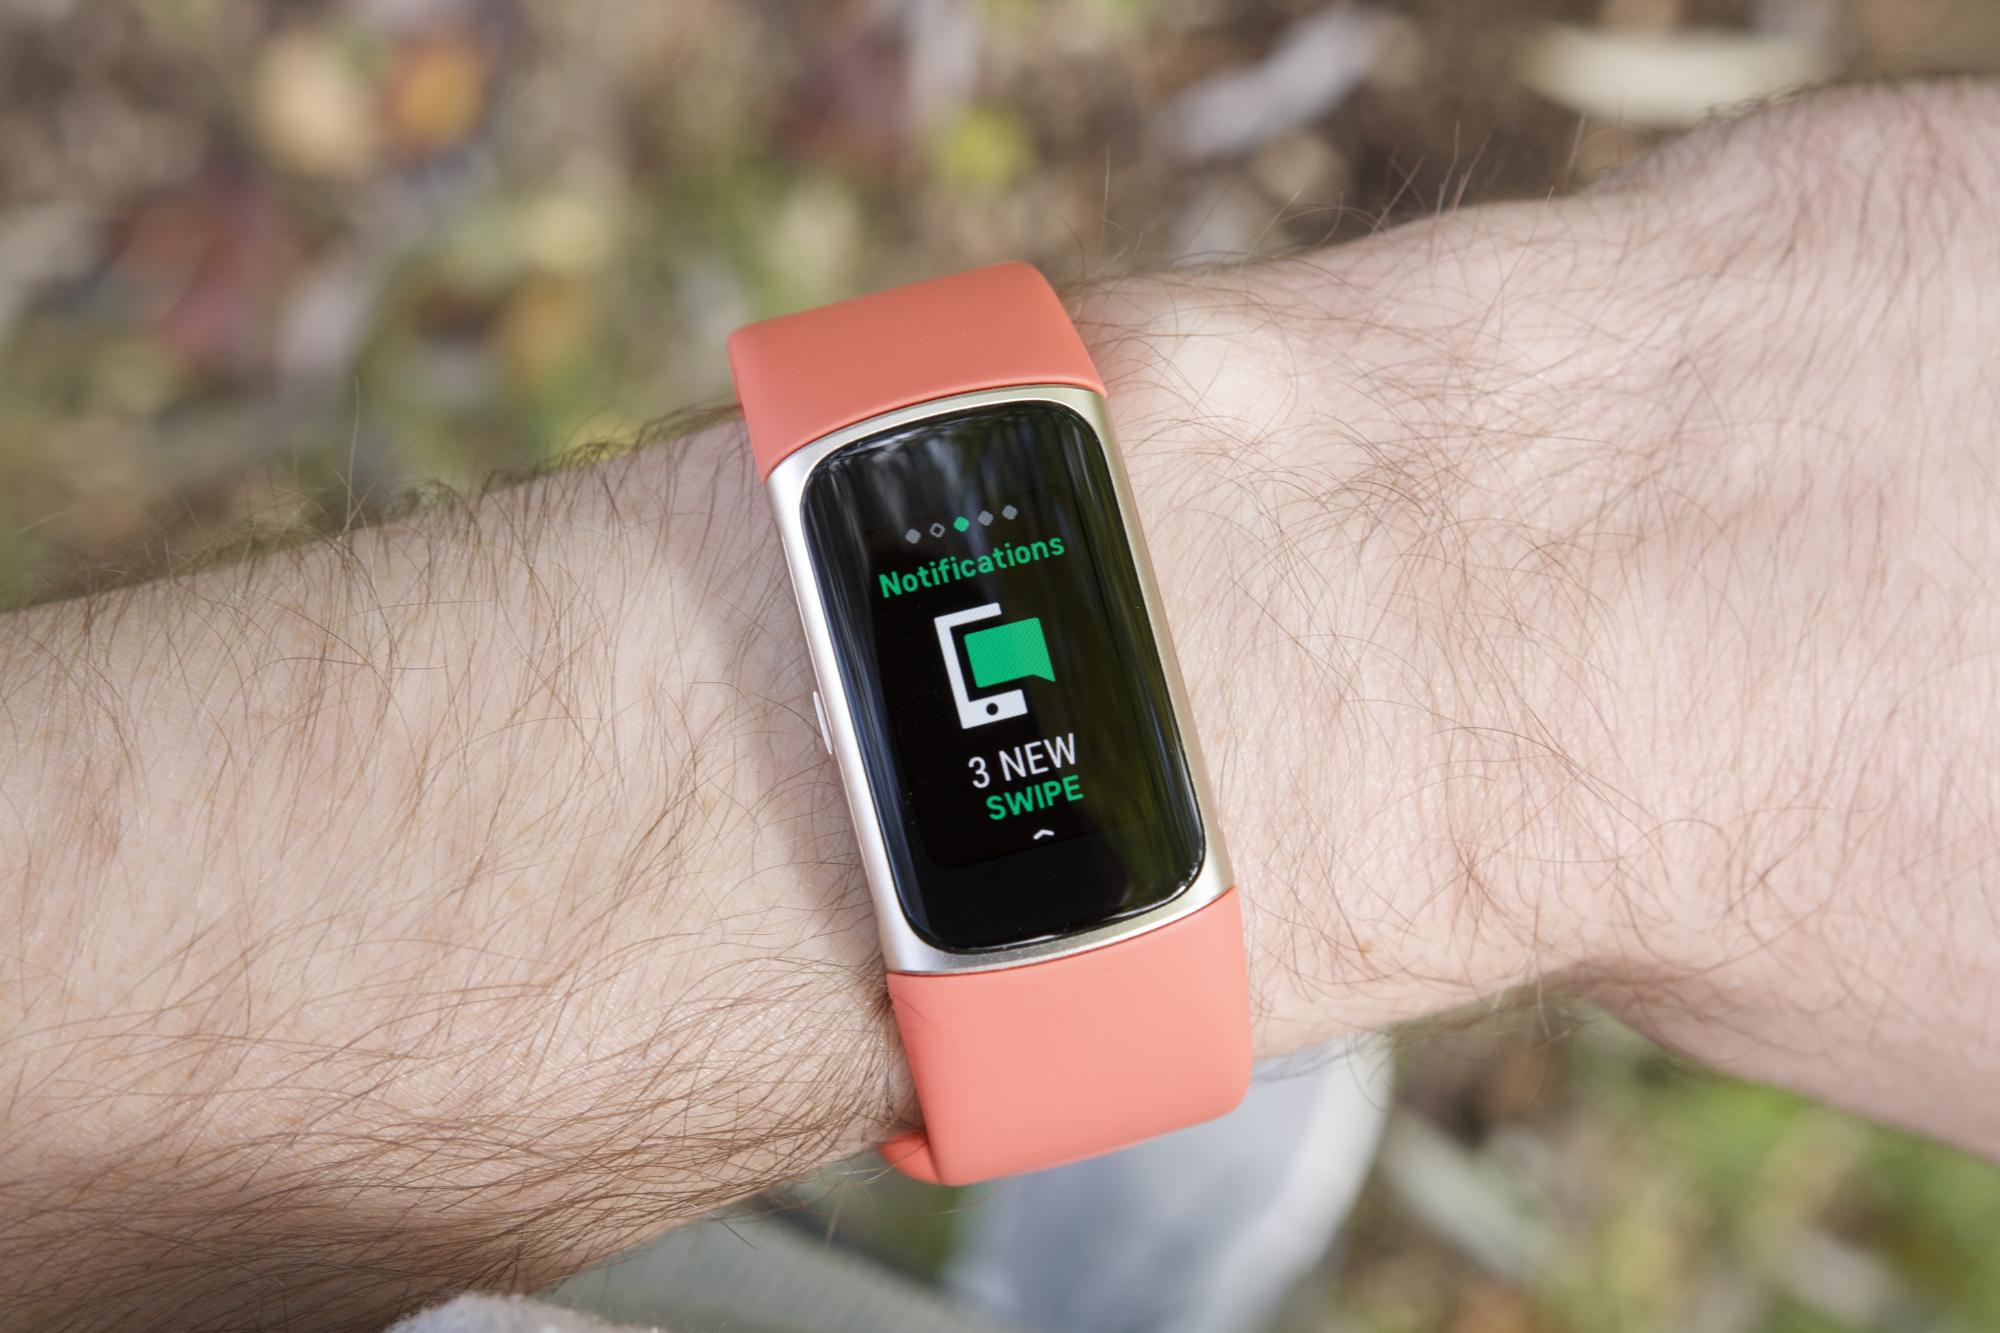 Fitbit Charge 6 Review: More Google on Your Wrist - CNET